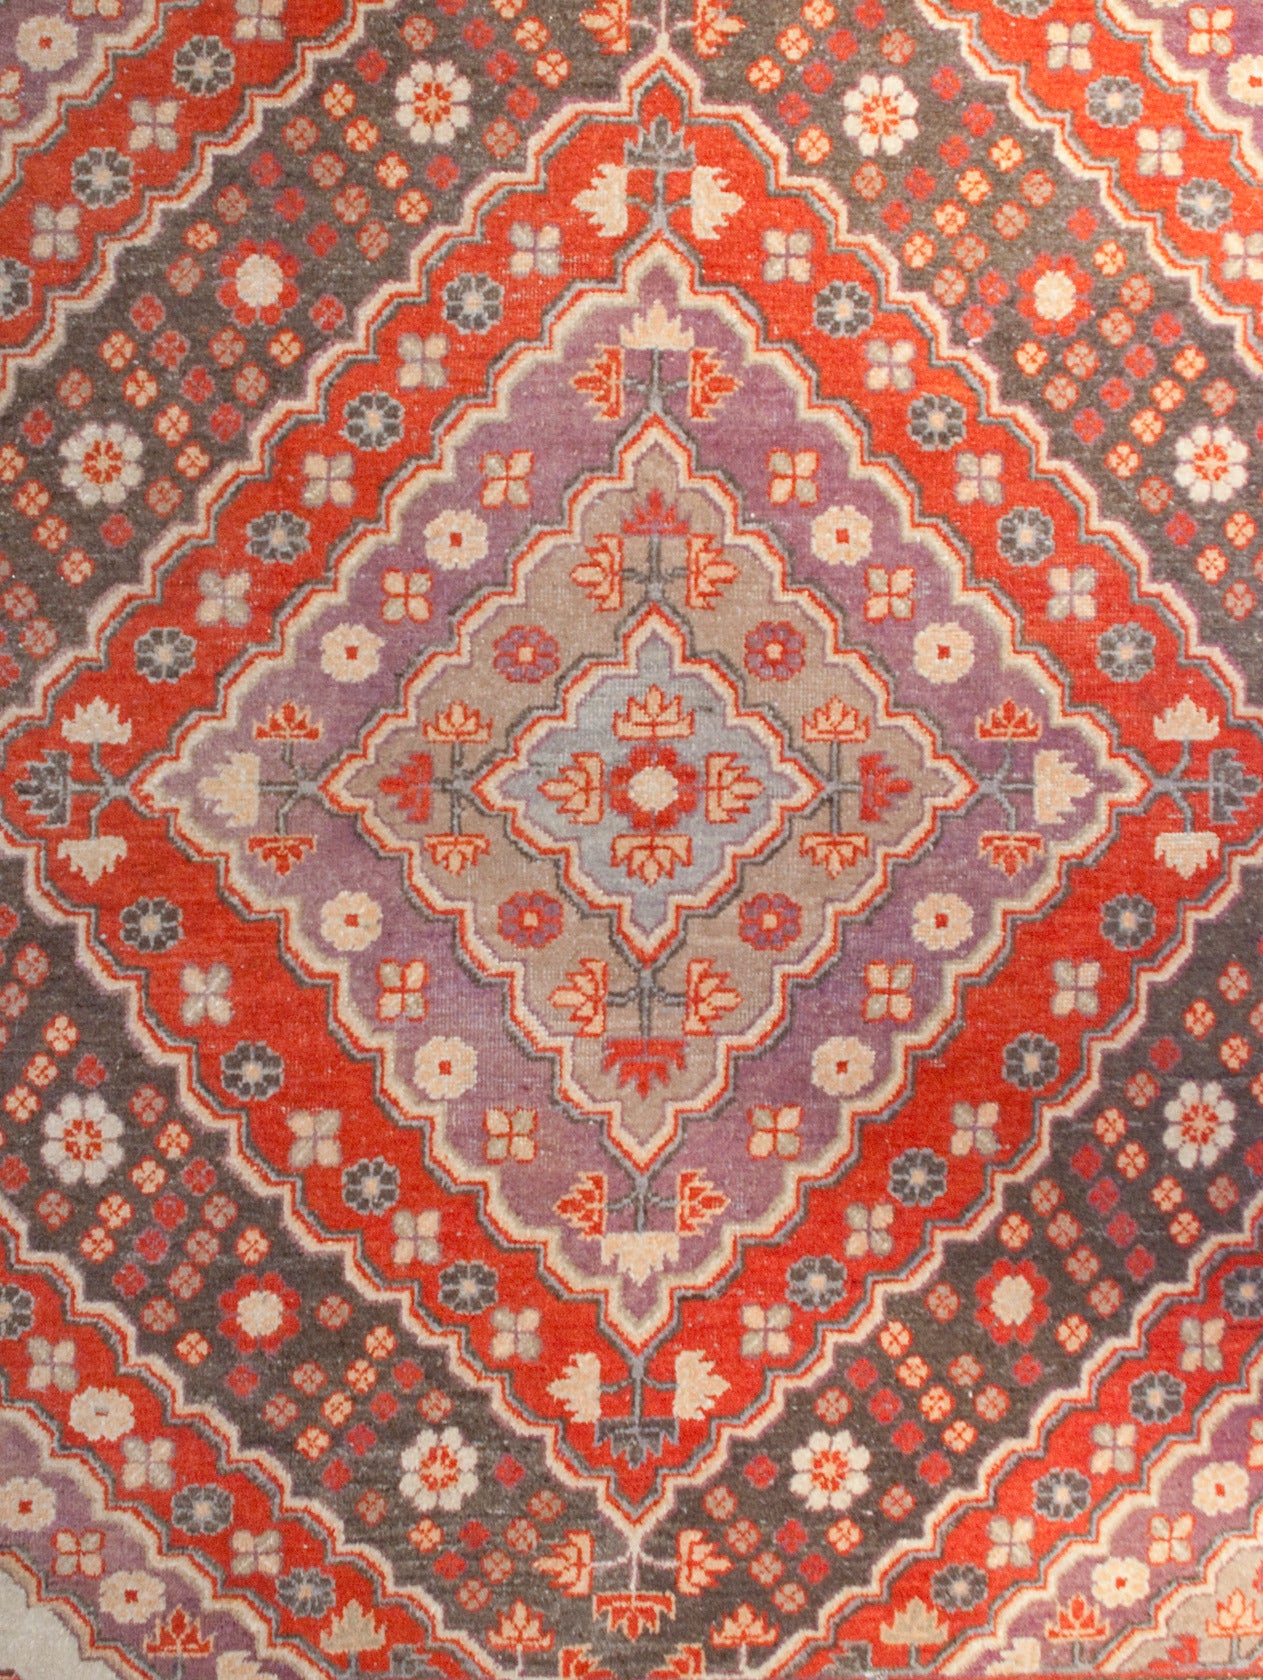 An amazing early 20th century monumental Central Asian Samarkand rug with multiple diamond medallions amidst a densely woven field of flowers, surrounded by multiple complementary floral borders.